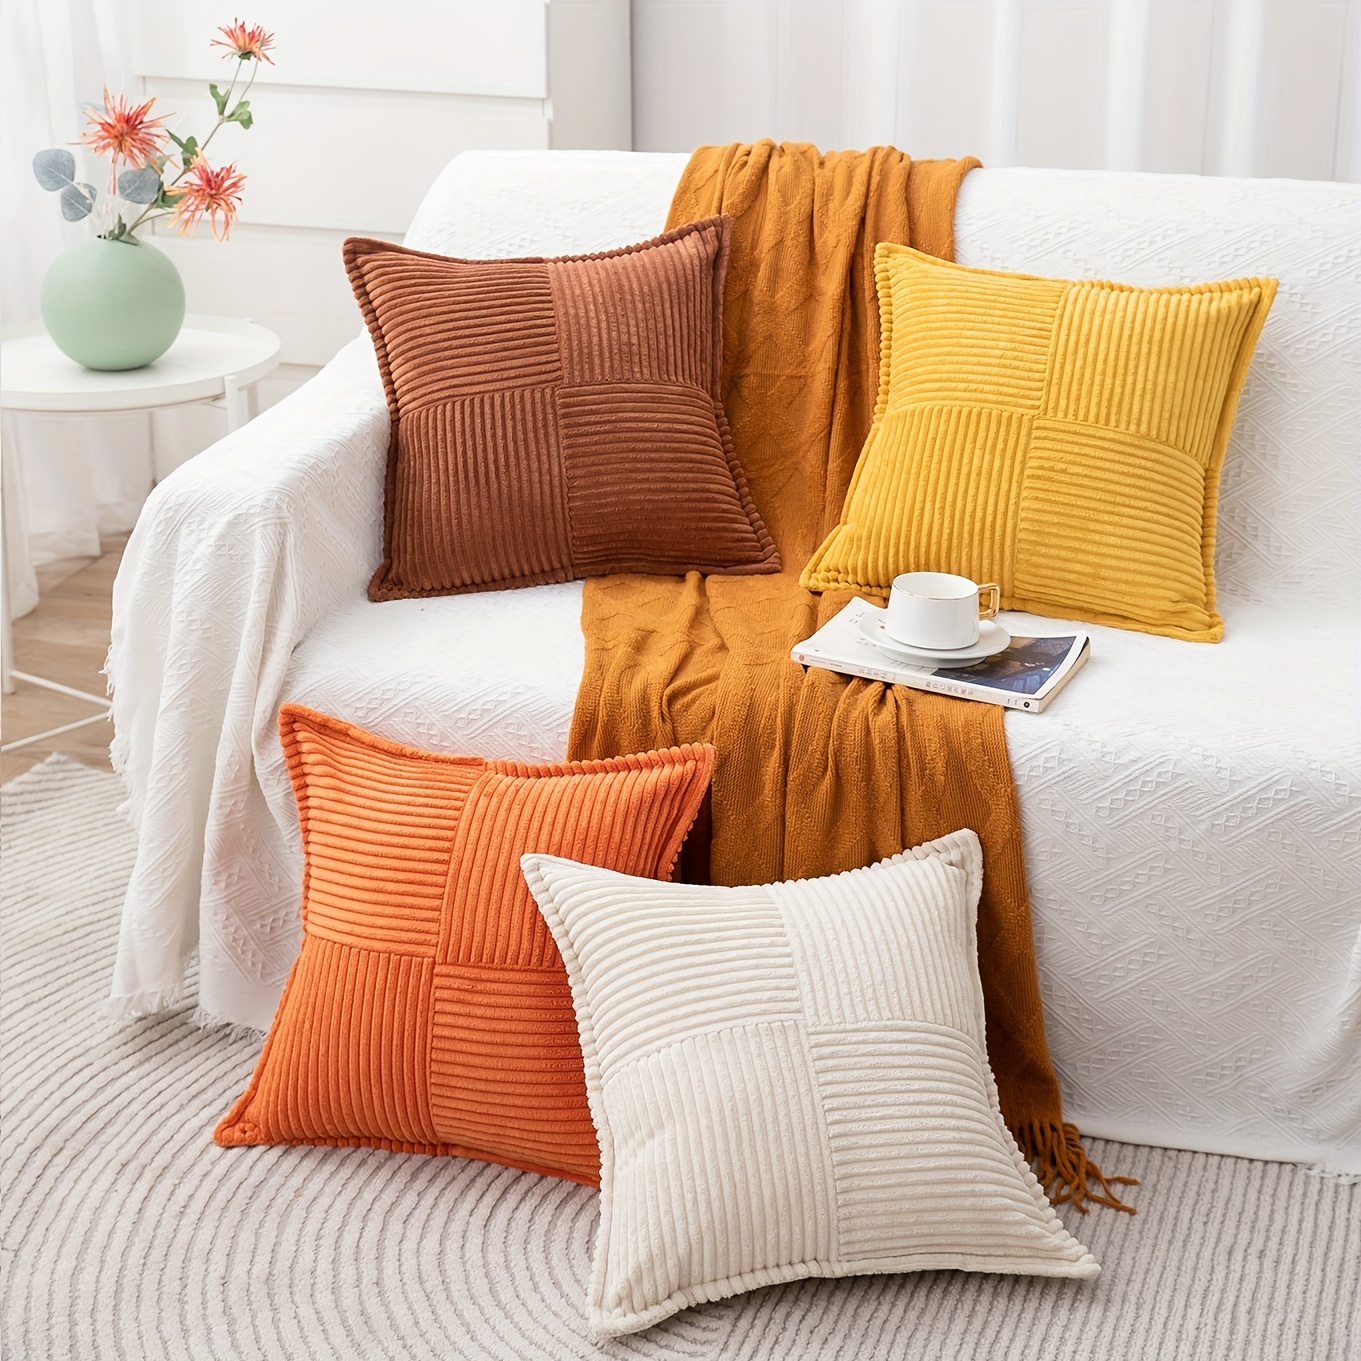 Soft Corduroy Striped Velvet Square Decorative Throw Pillow Cusion for Couch, 18 inch x 18 inch, Orange, 2 Pack, Size: 18 x 18